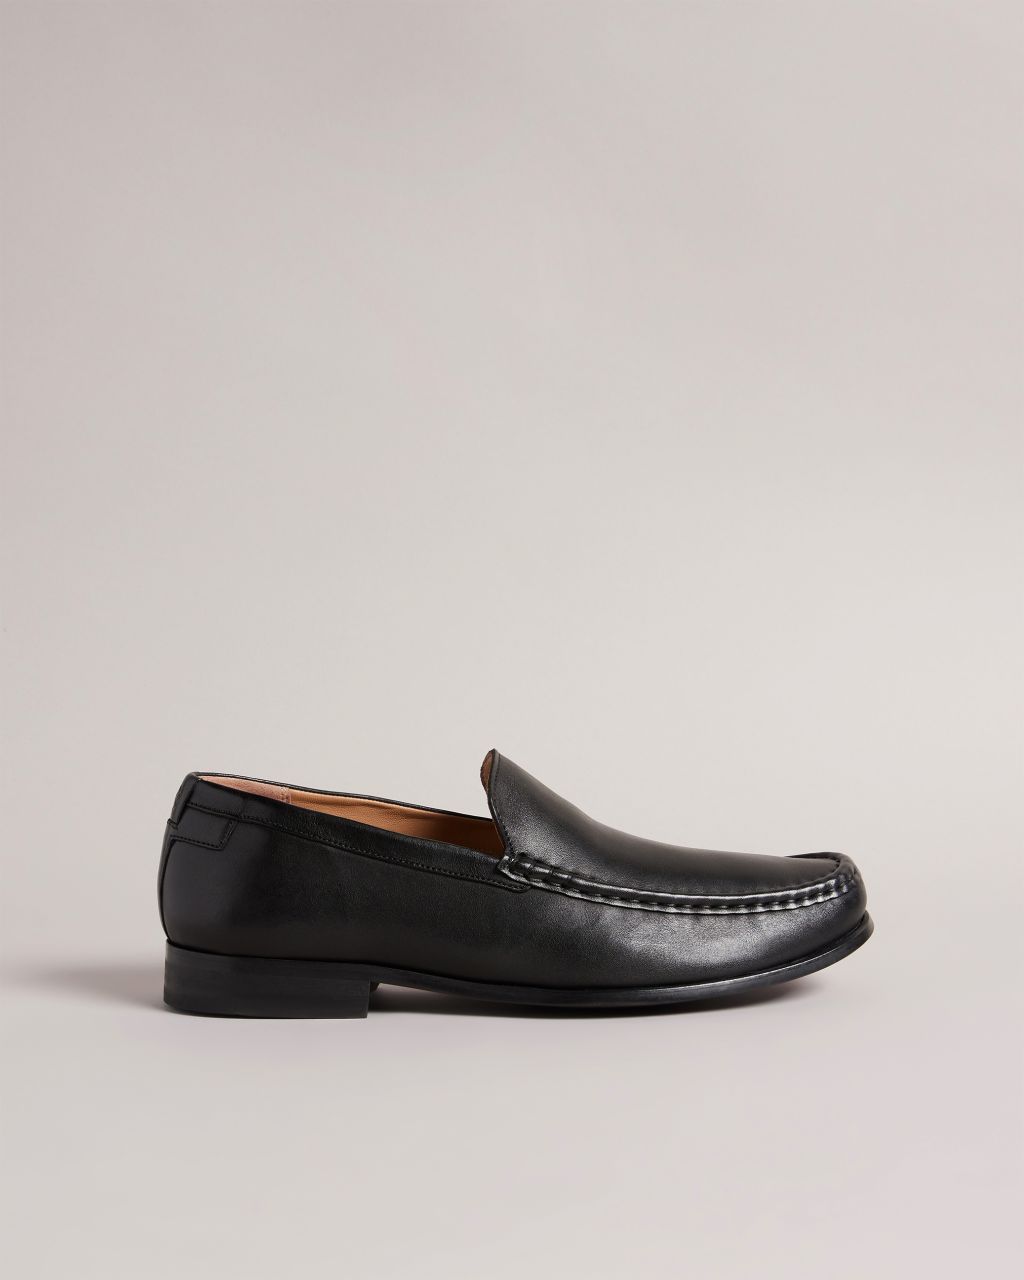 Ted Baker Men's Penny Loafers in Black, Labi, Leather